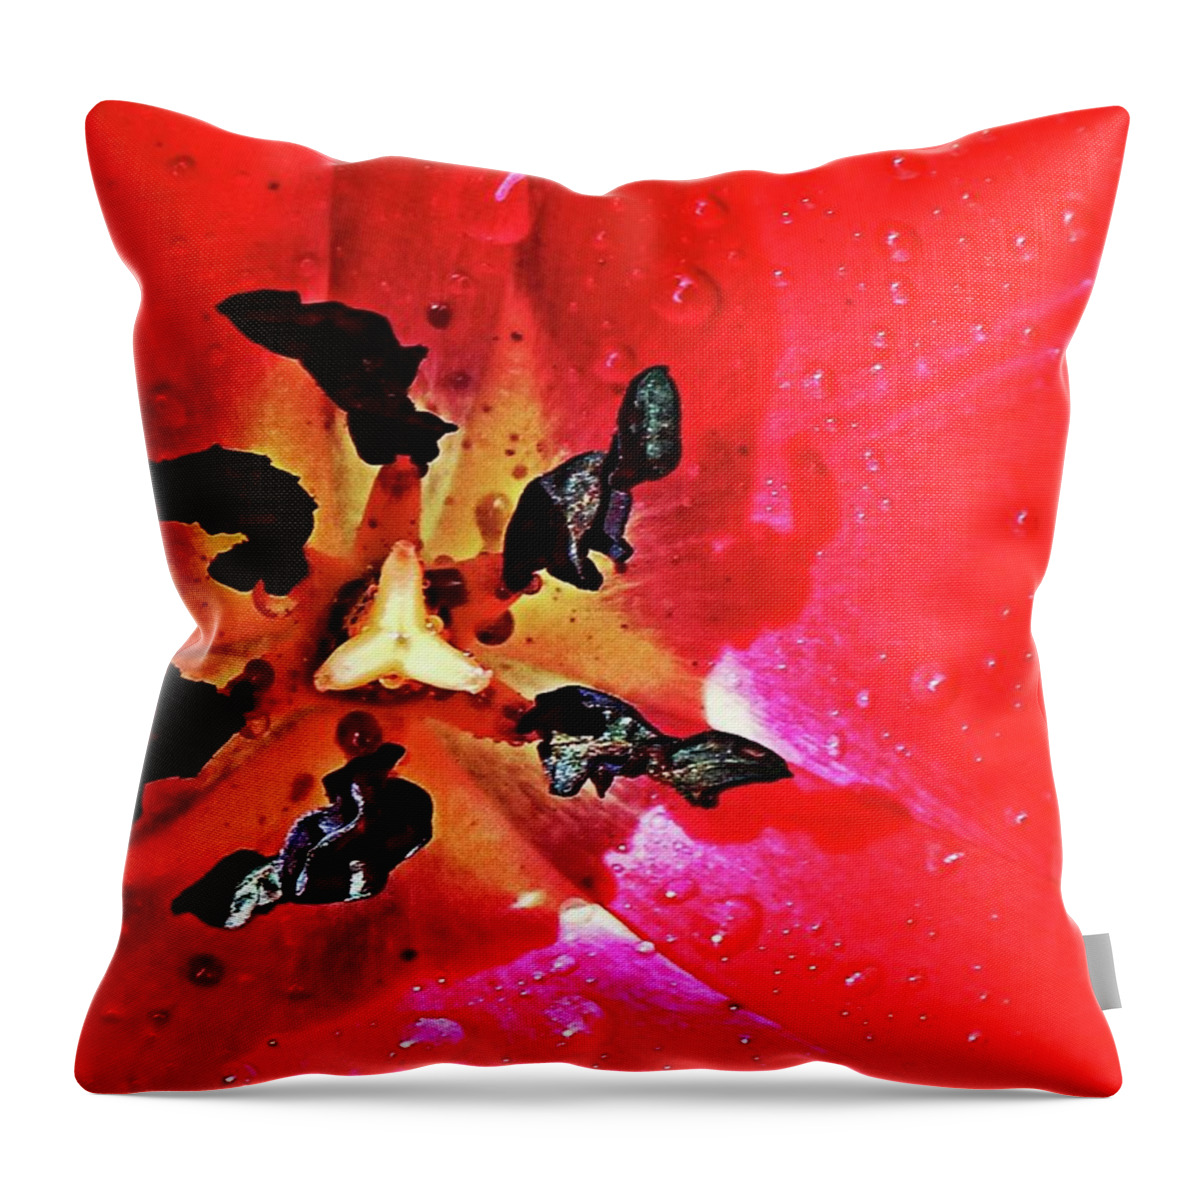 Flower Throw Pillow featuring the photograph Floral Close Up by Martin Smith